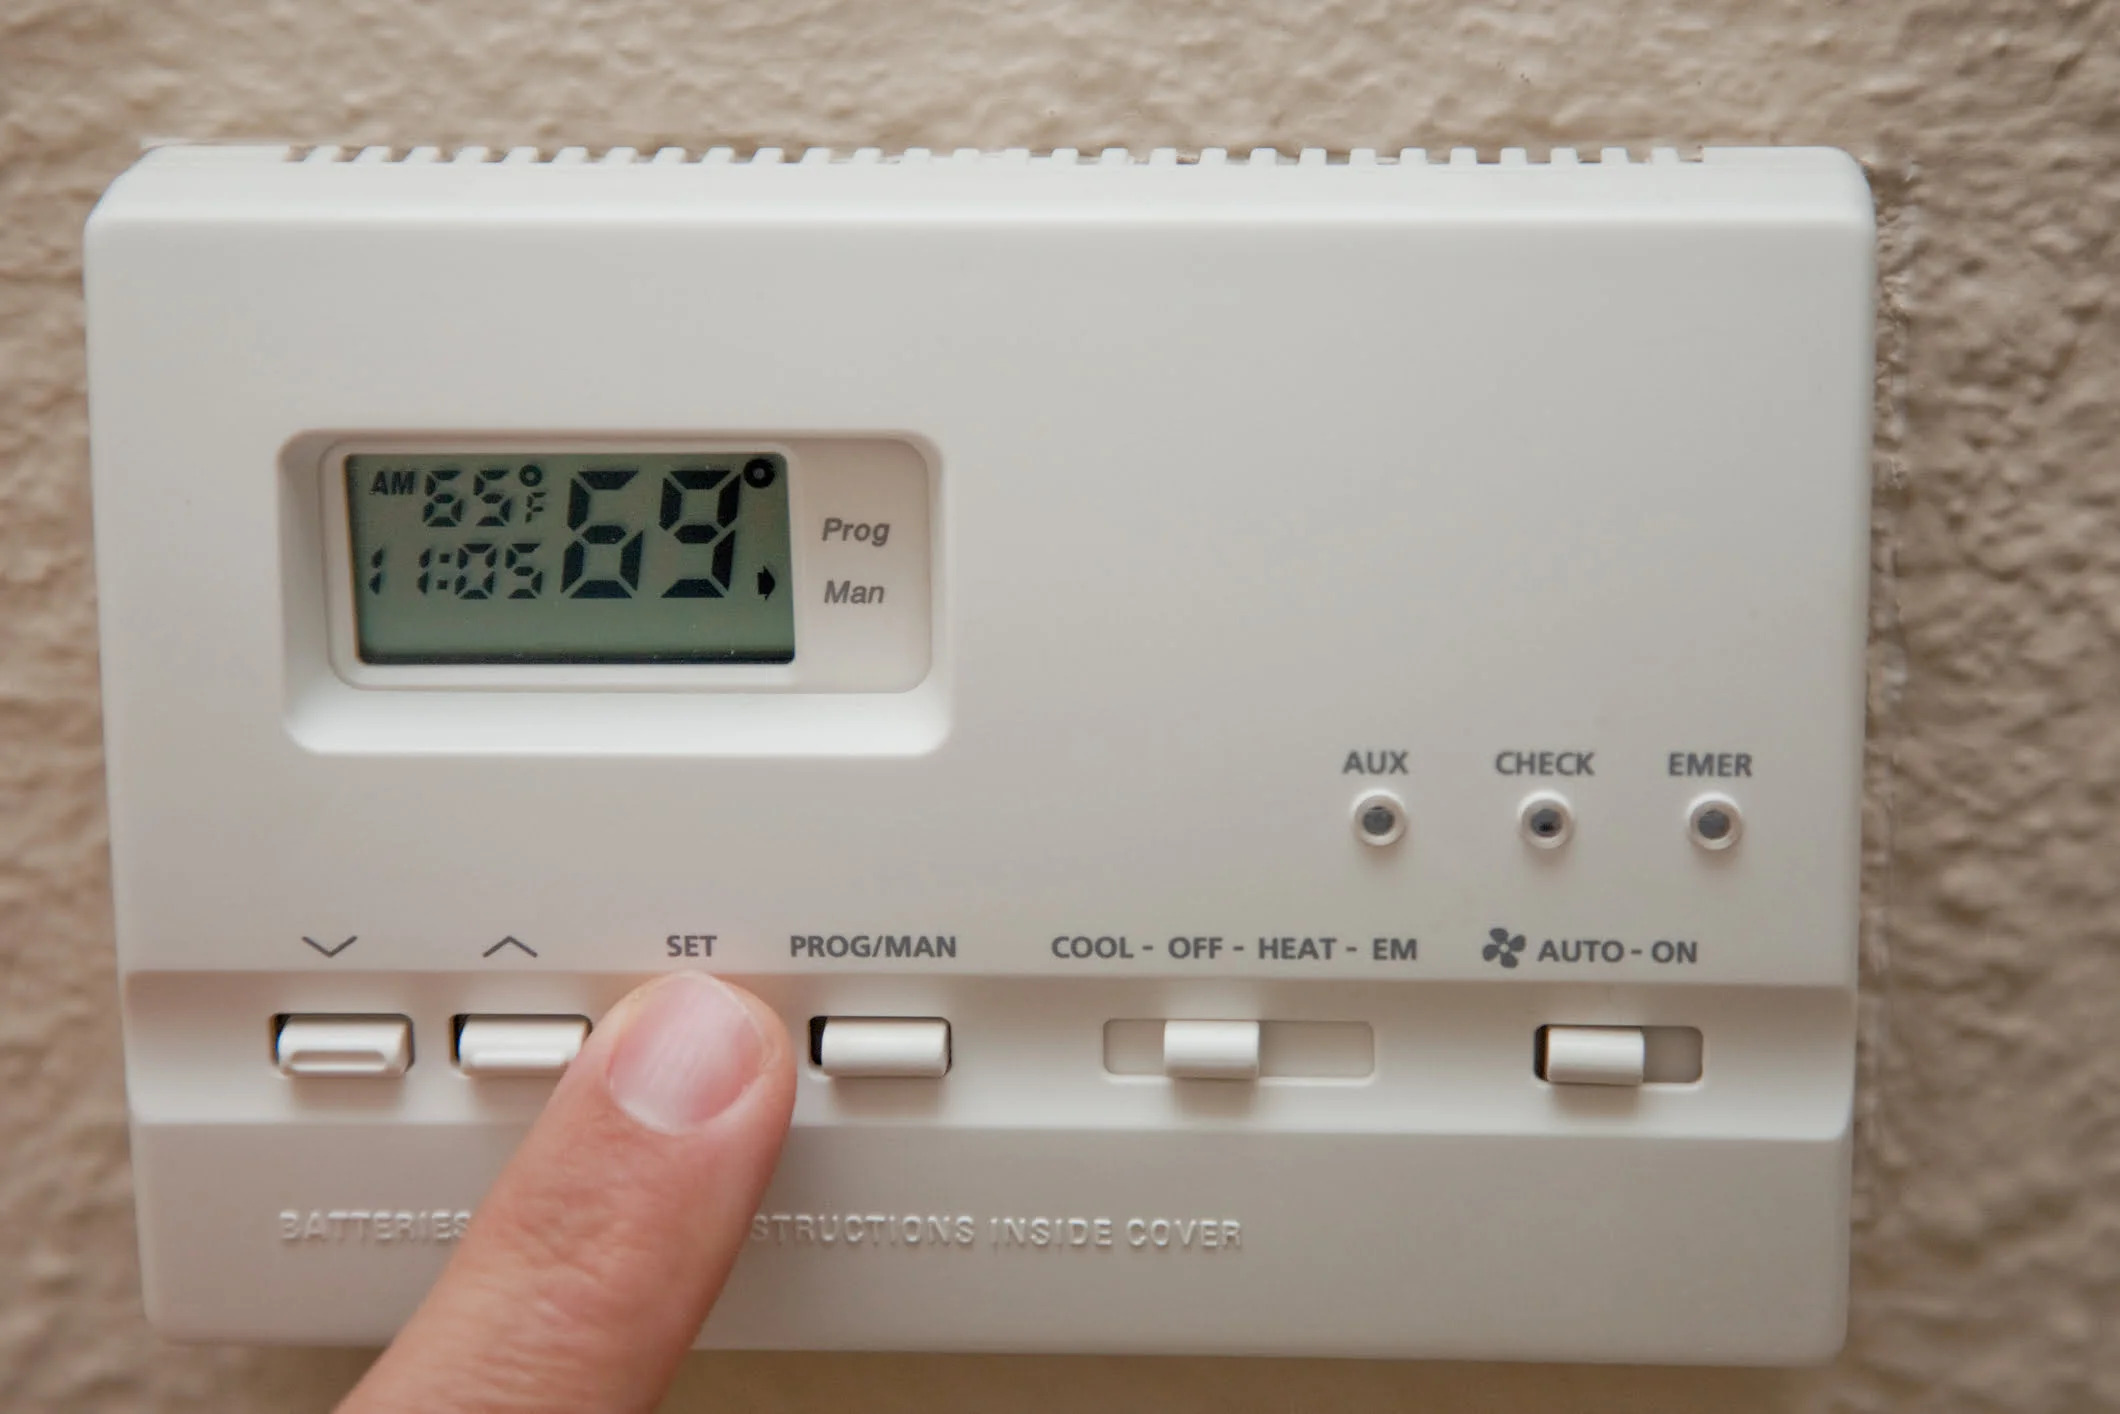 How To Use A Central Heating Thermostat